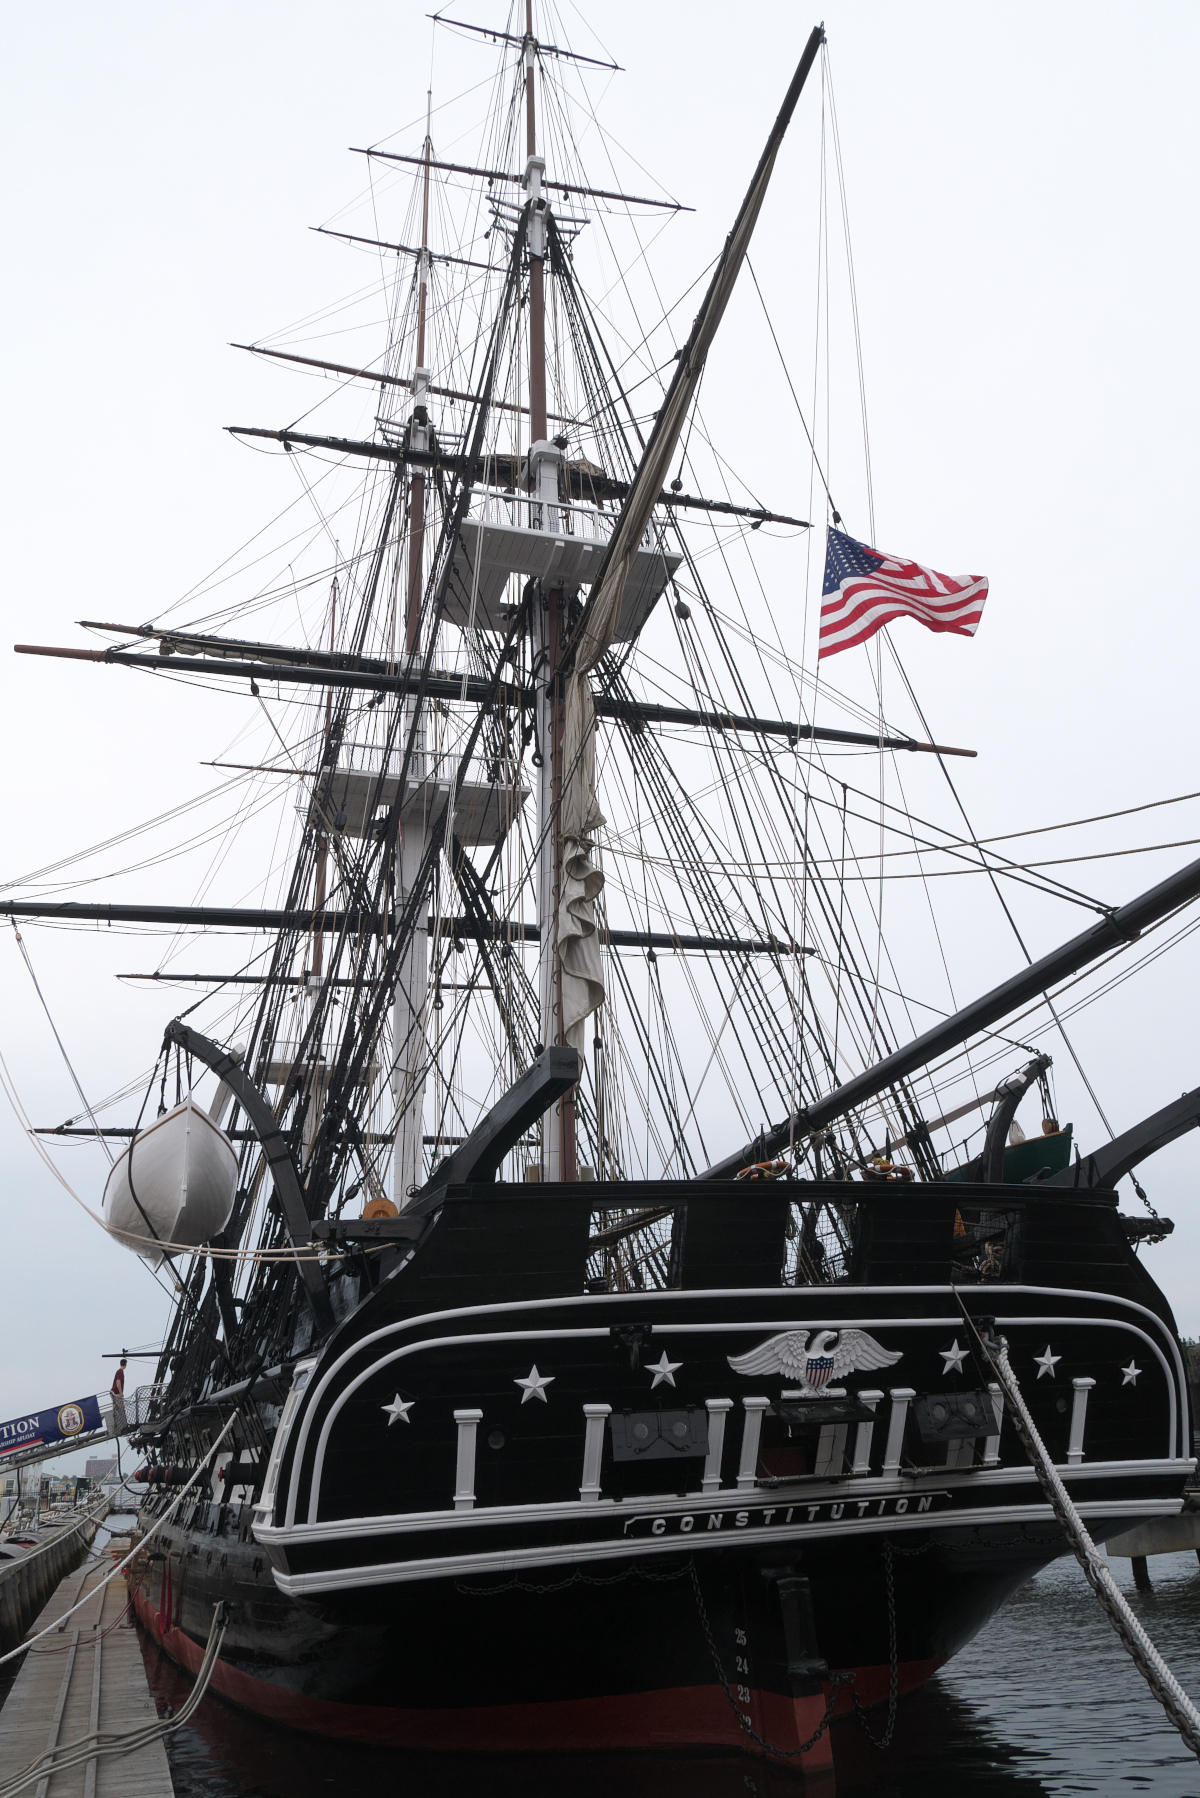 The stern of the USS Constitution.